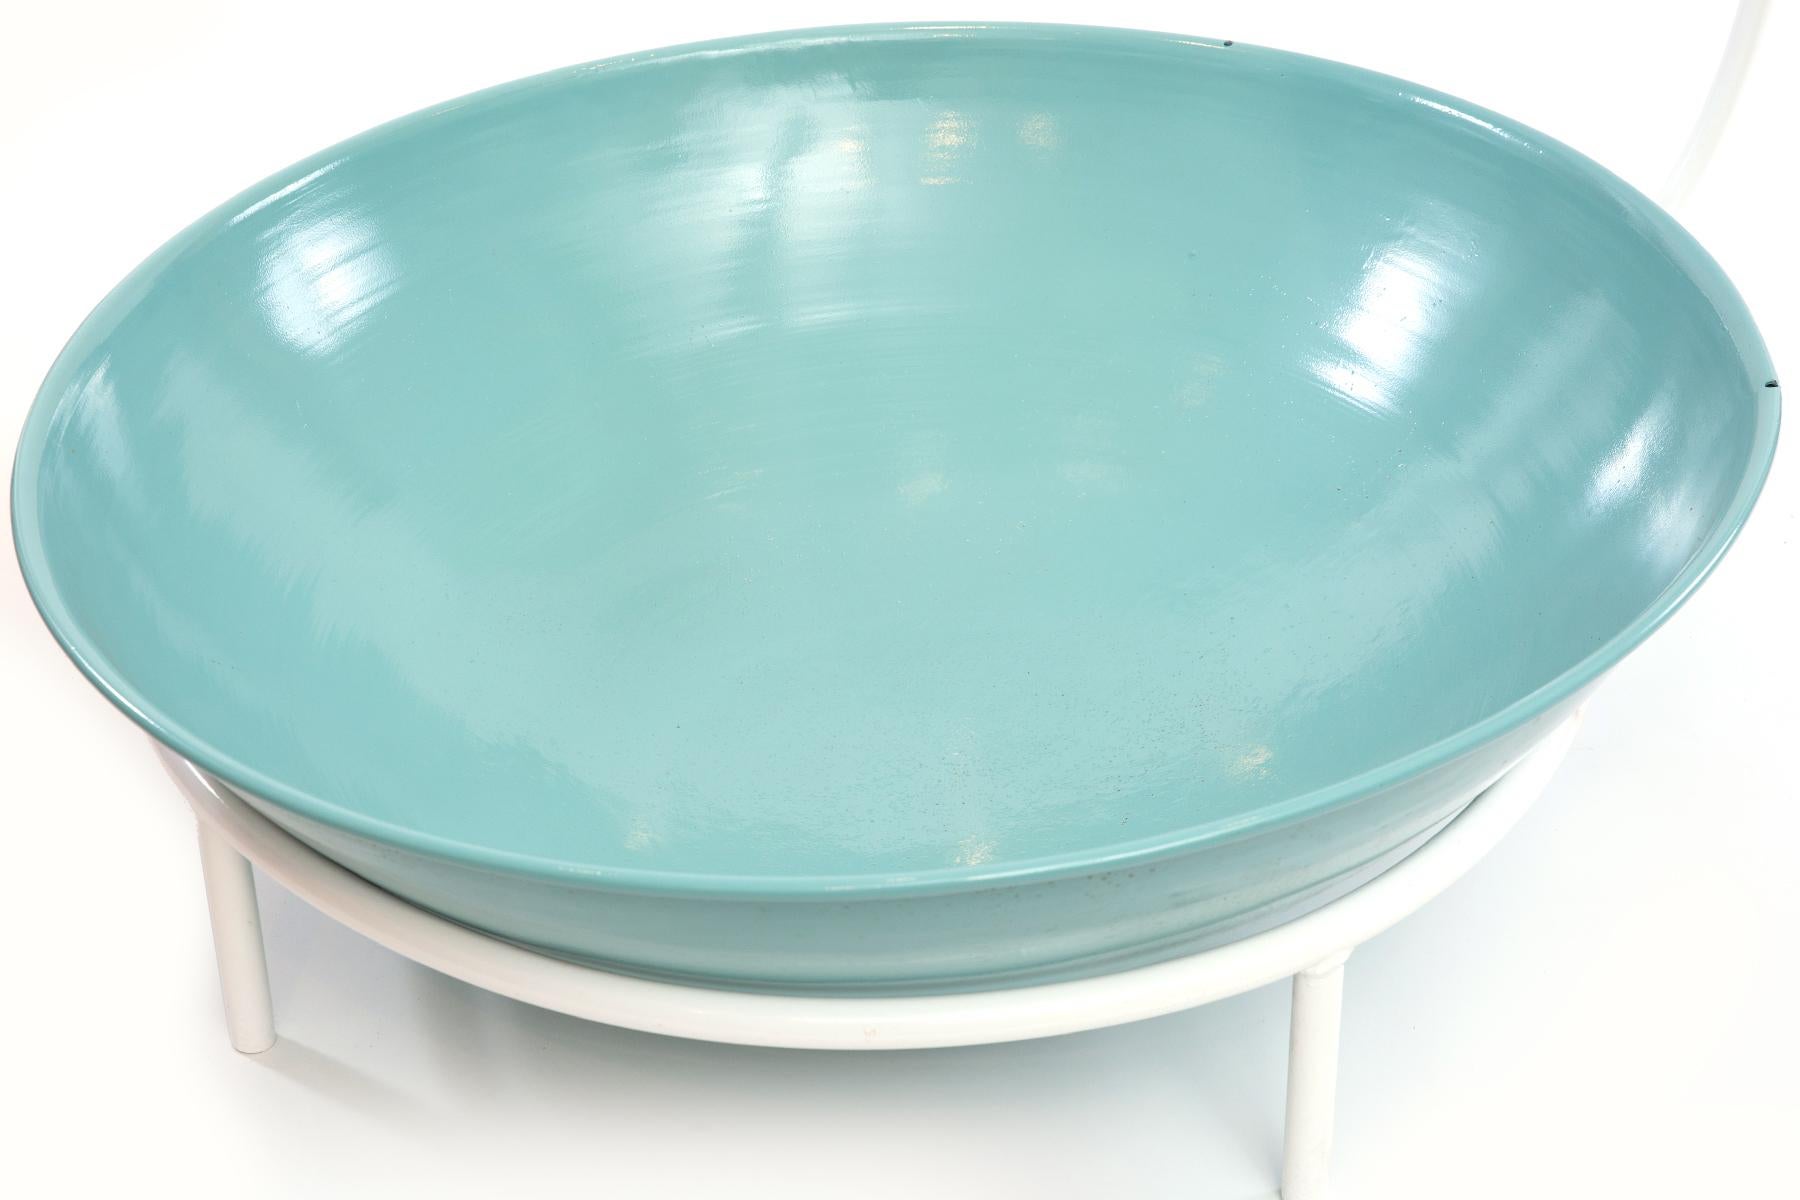 This whimsical fountain in powder-coated steel features three tiers, each with a pastel colored basin in graduated size.